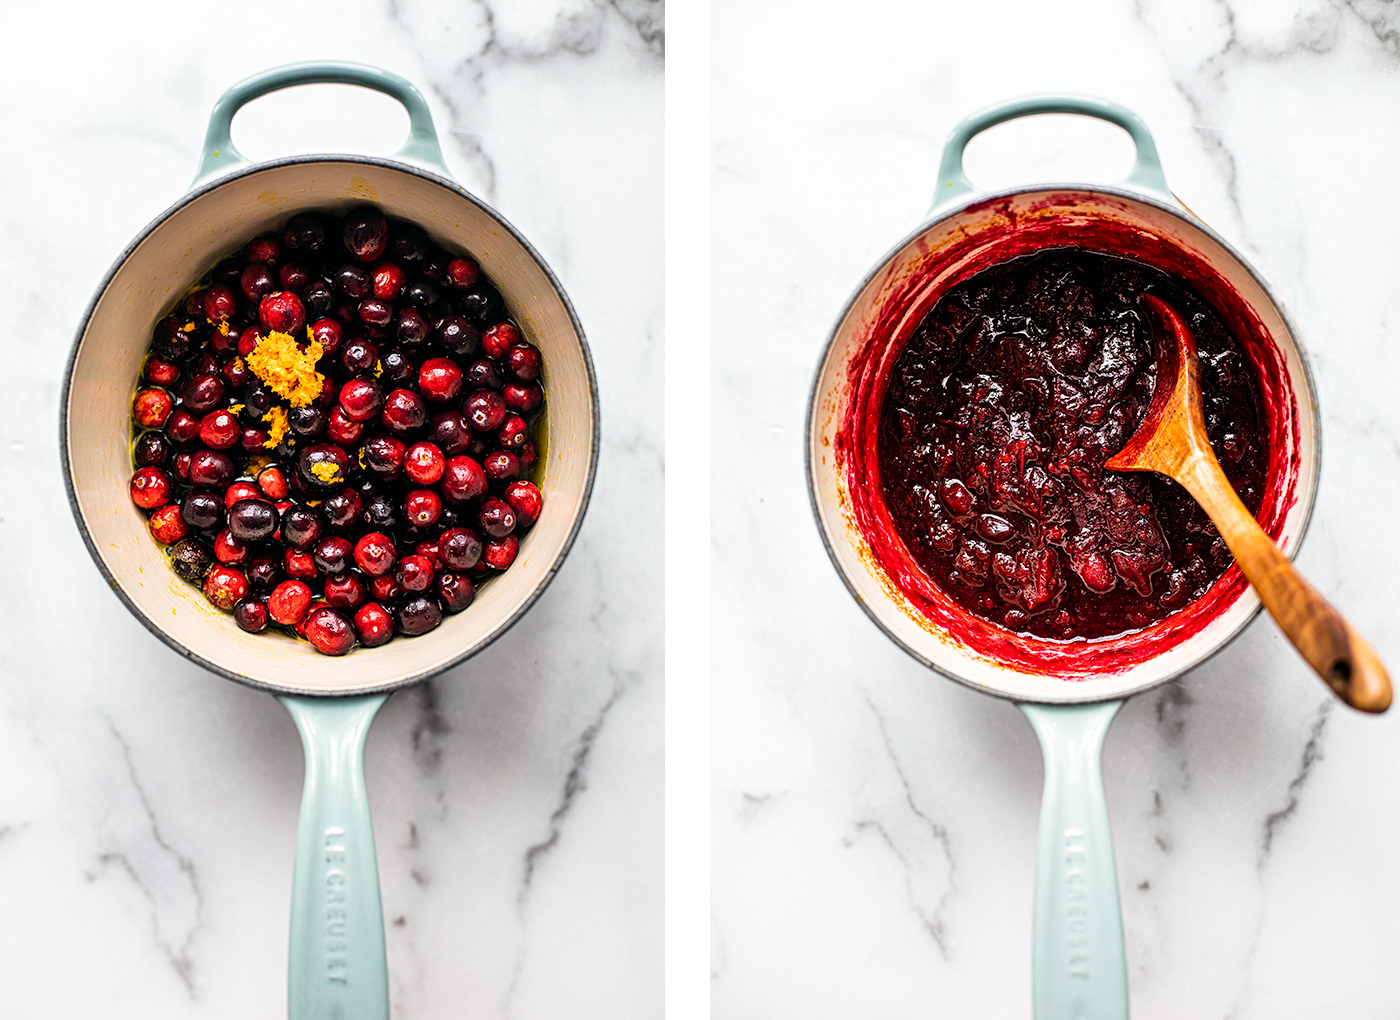 Side by side shots of cranberry sauce in saucepan before being boiled, and after.